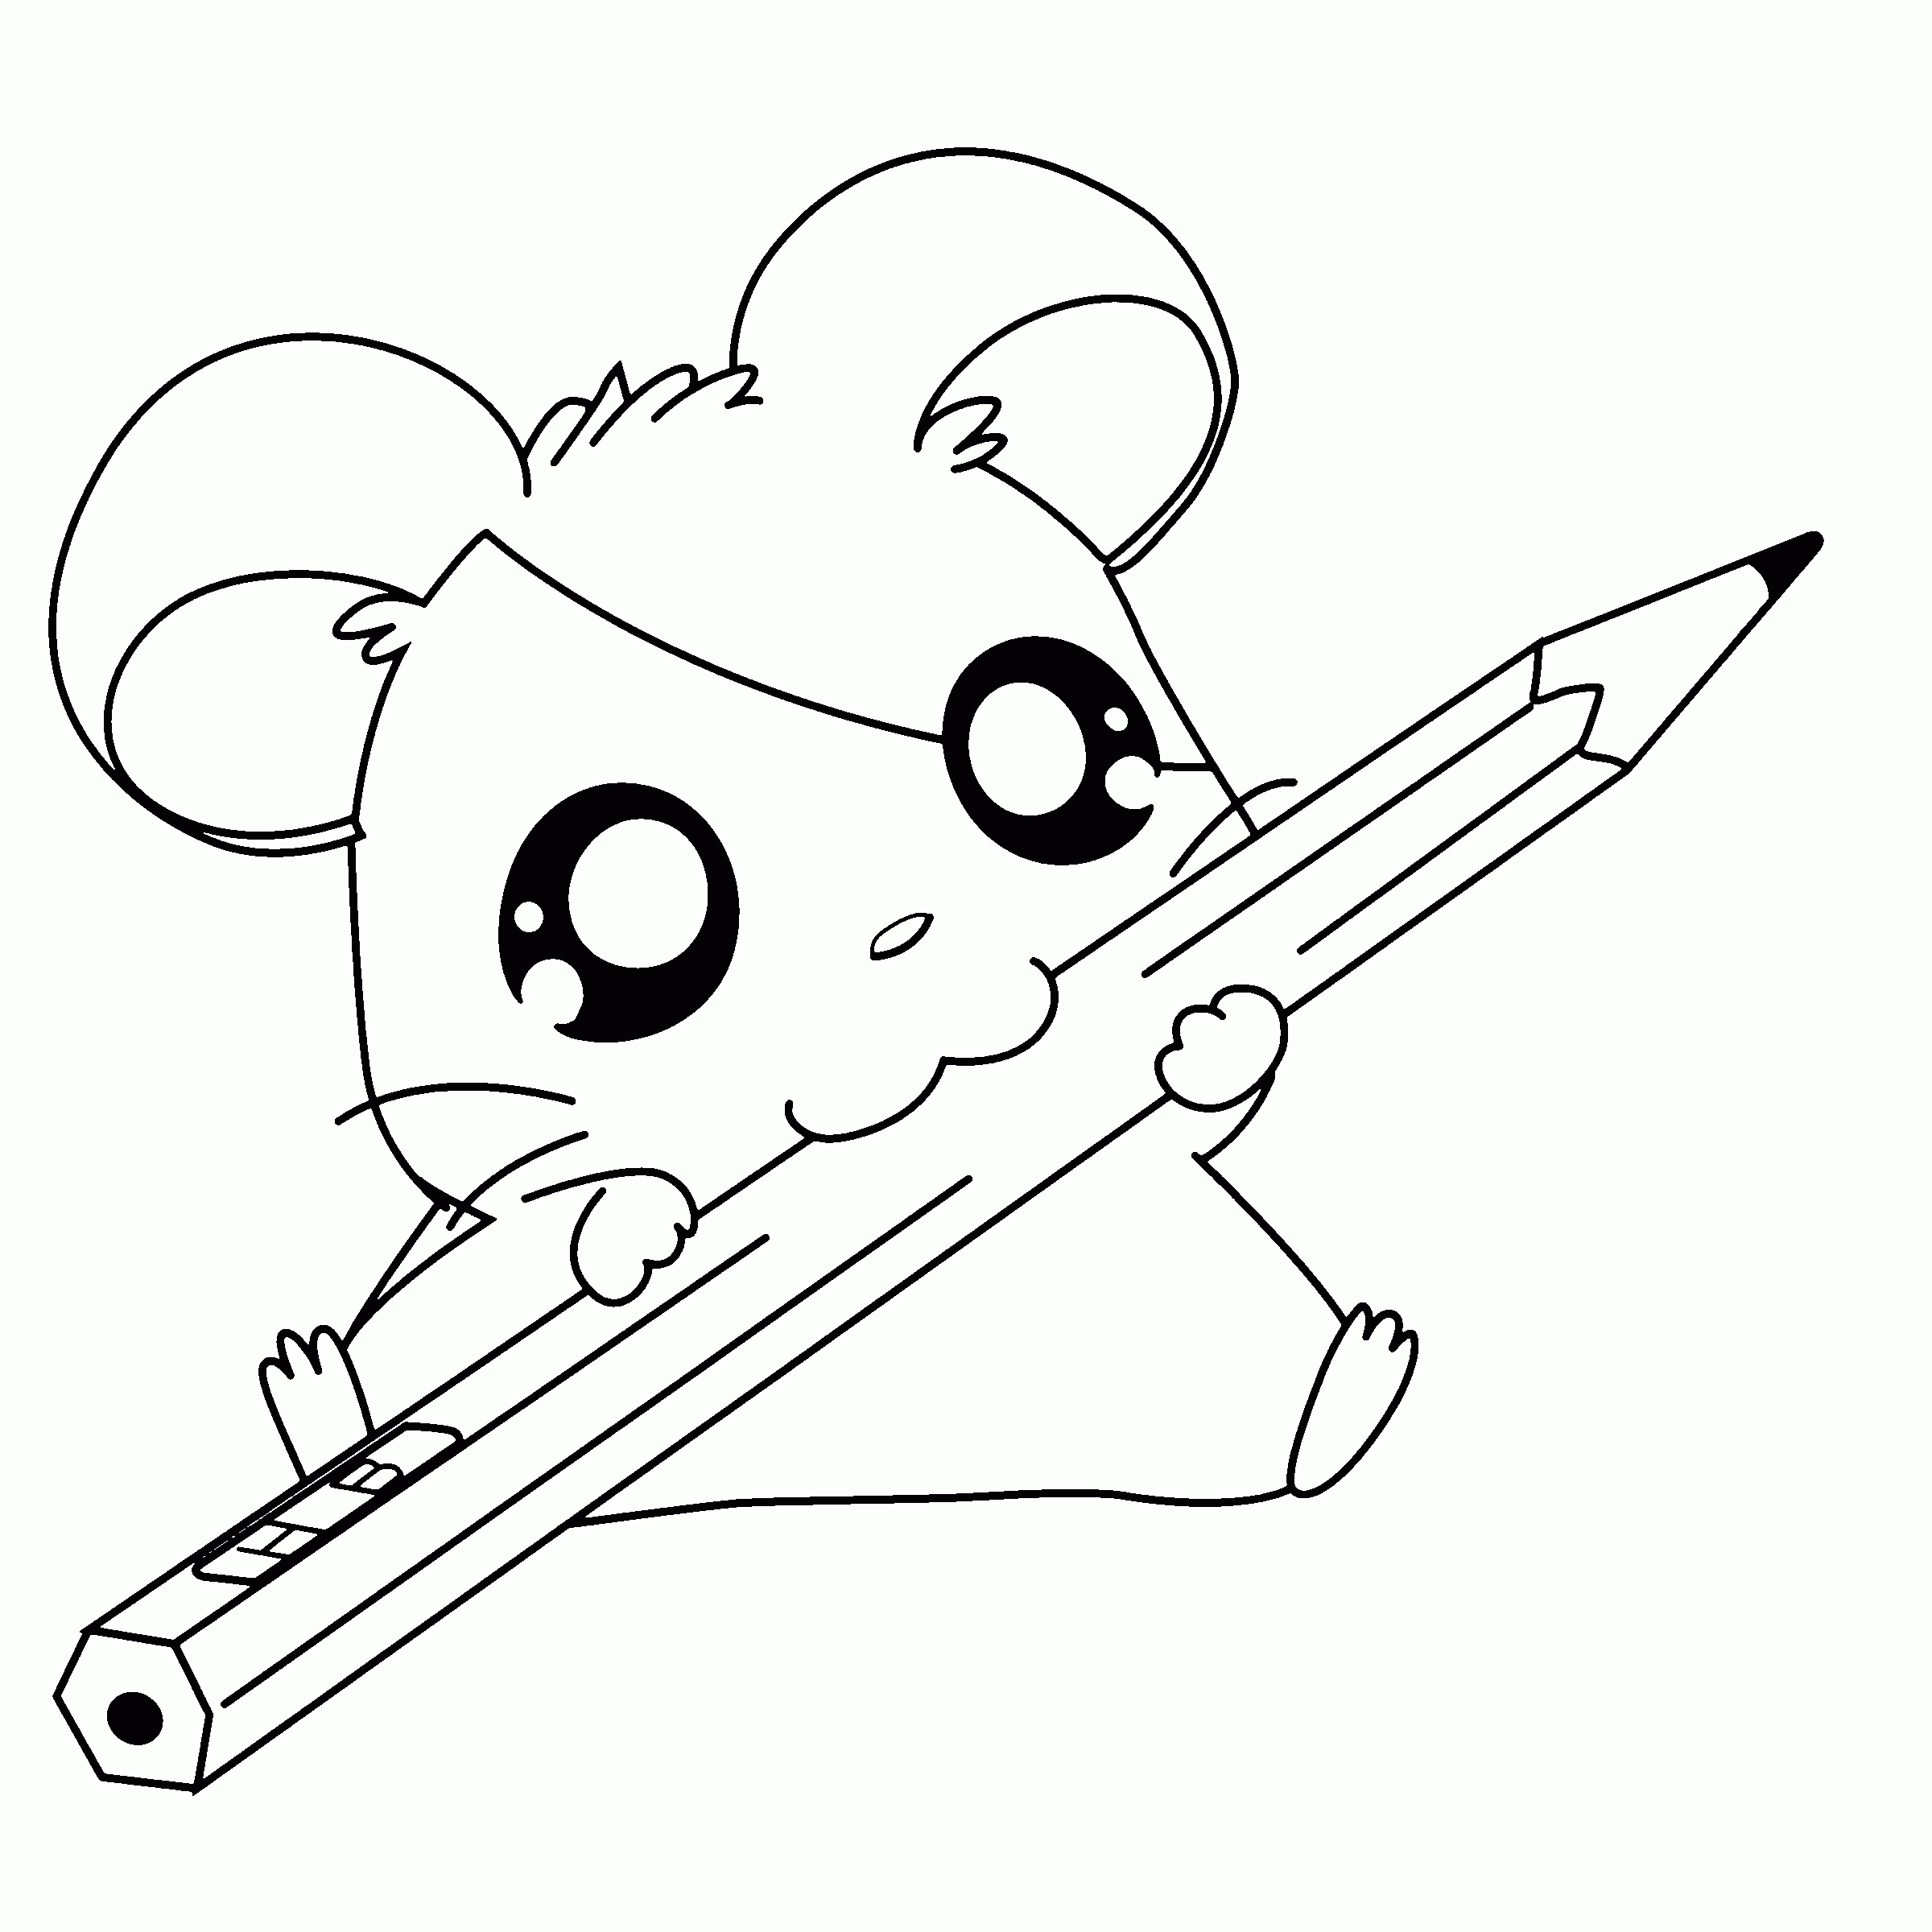 Coloring Ideas : Coloring Ideas Cute Baby Animal Sheets For Adults - Free Printable Pictures Of Baby Animals